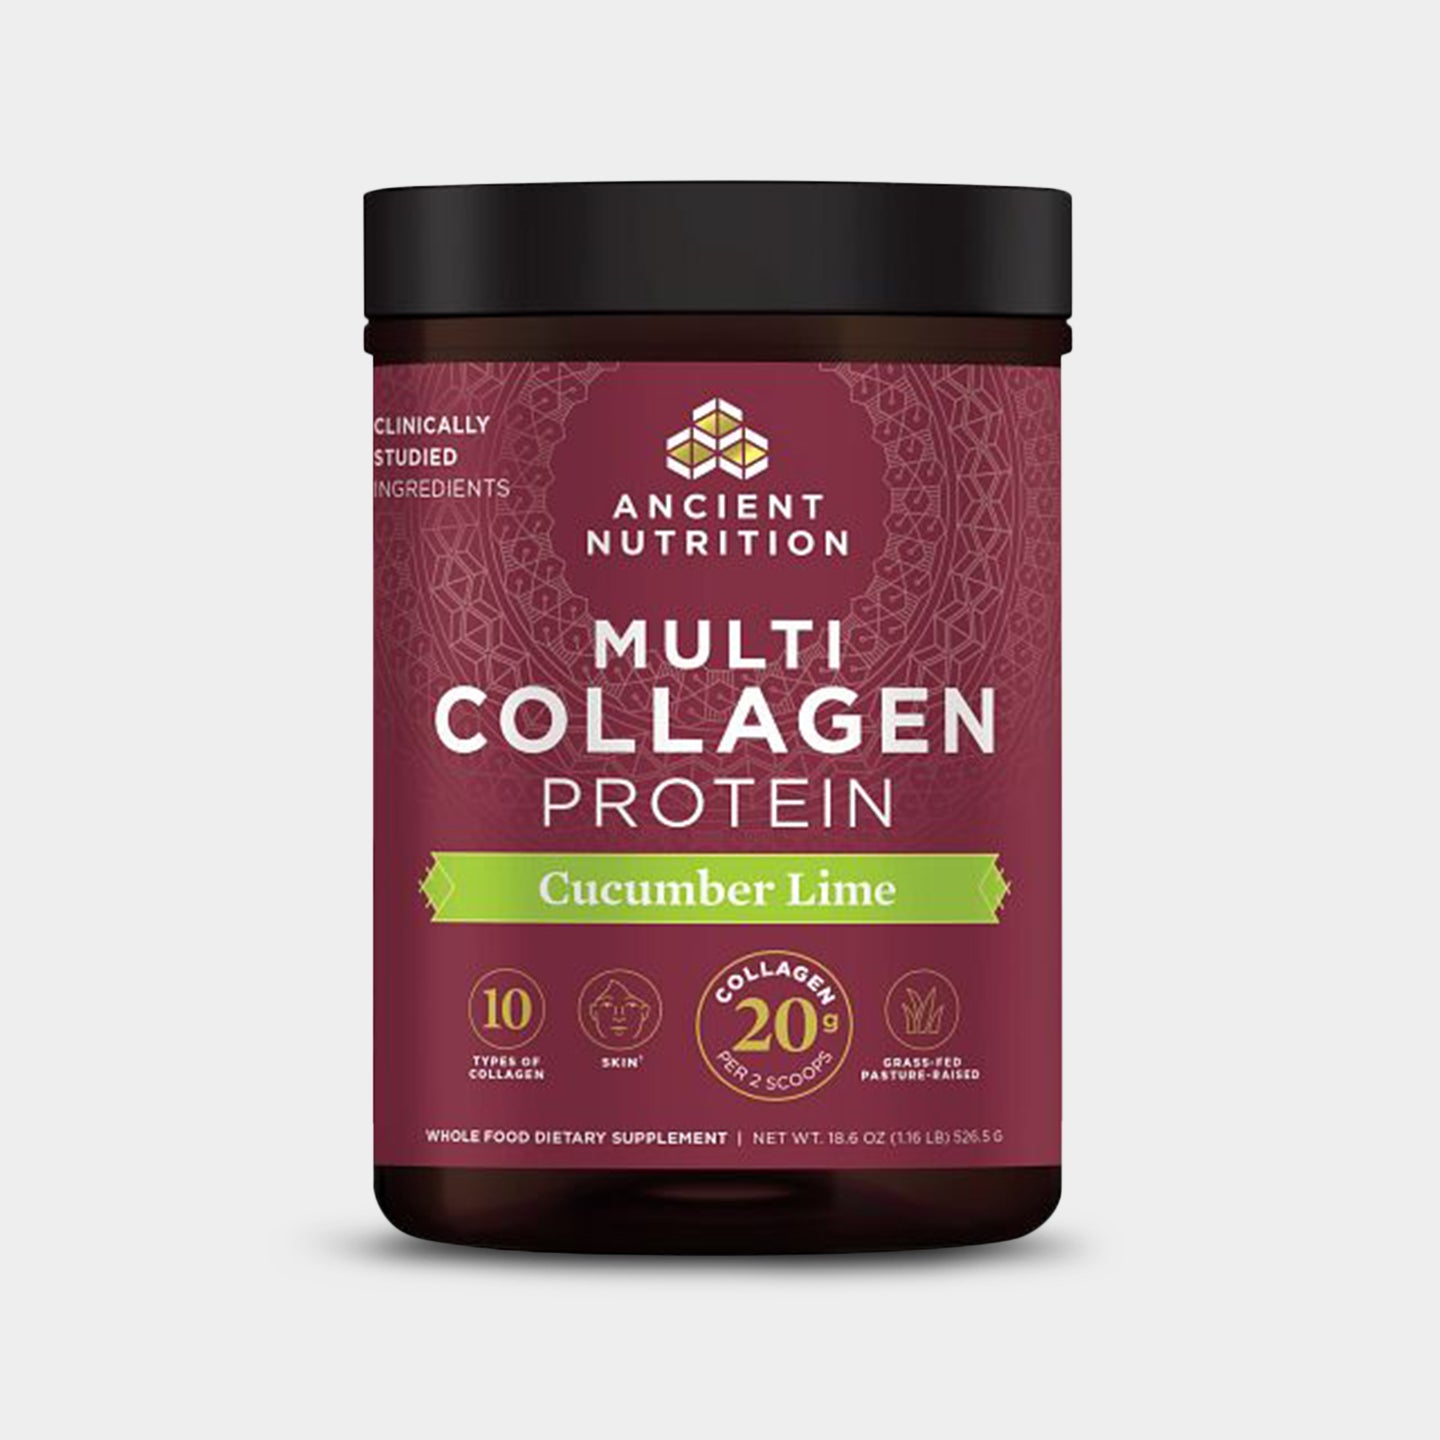 Ancient Nutrition Multi Collagen Protein - 20g, Cucumber Lime, 45 Servings A1